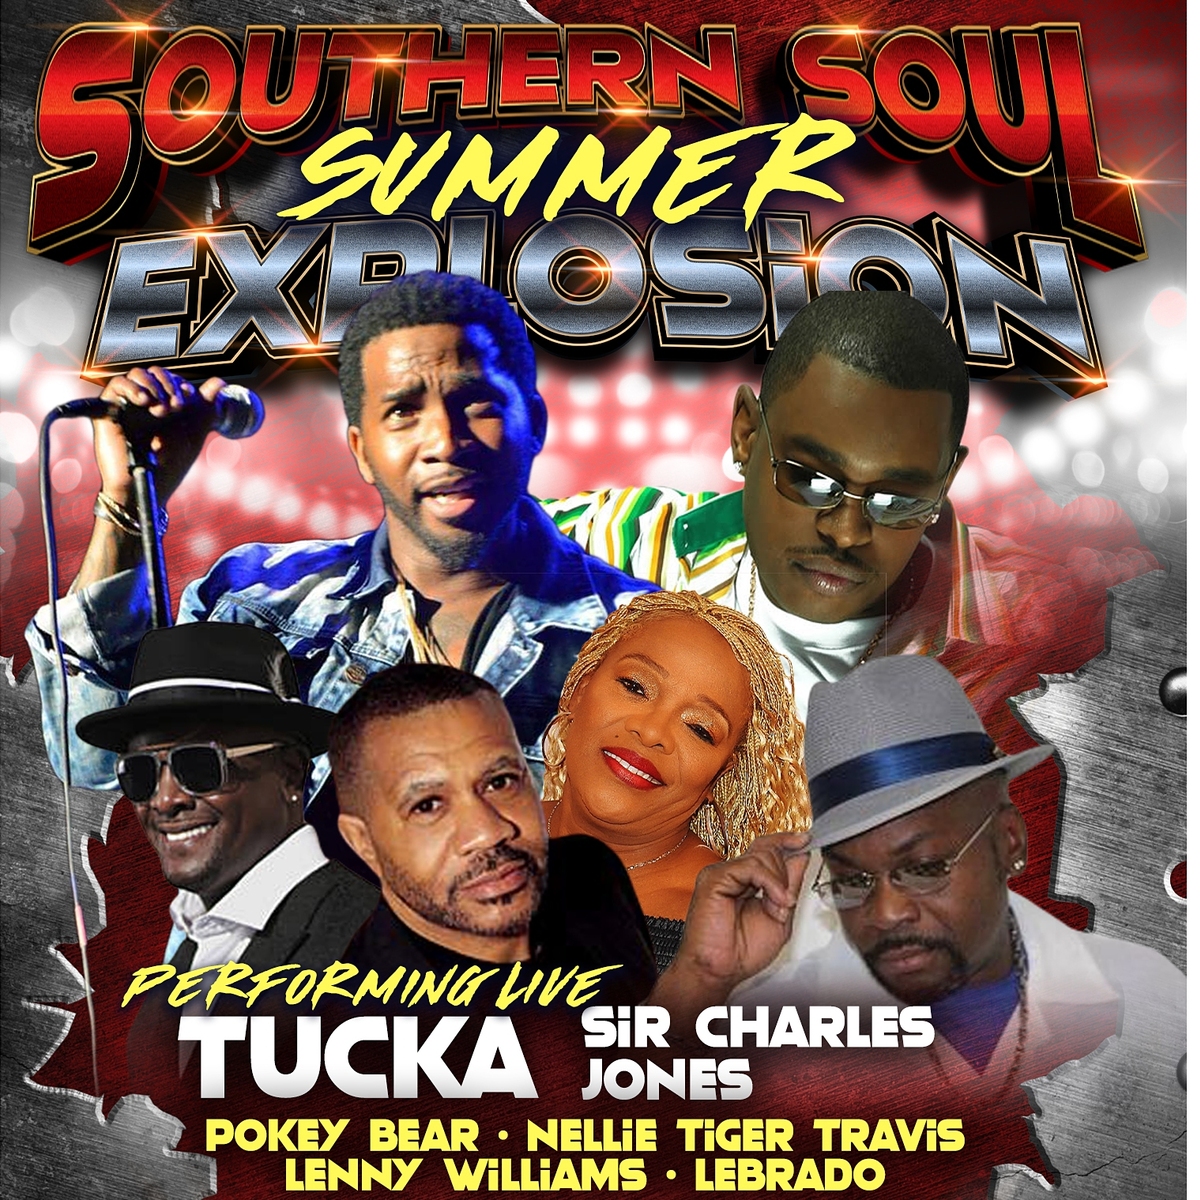 Southern Soul Summer Explosion